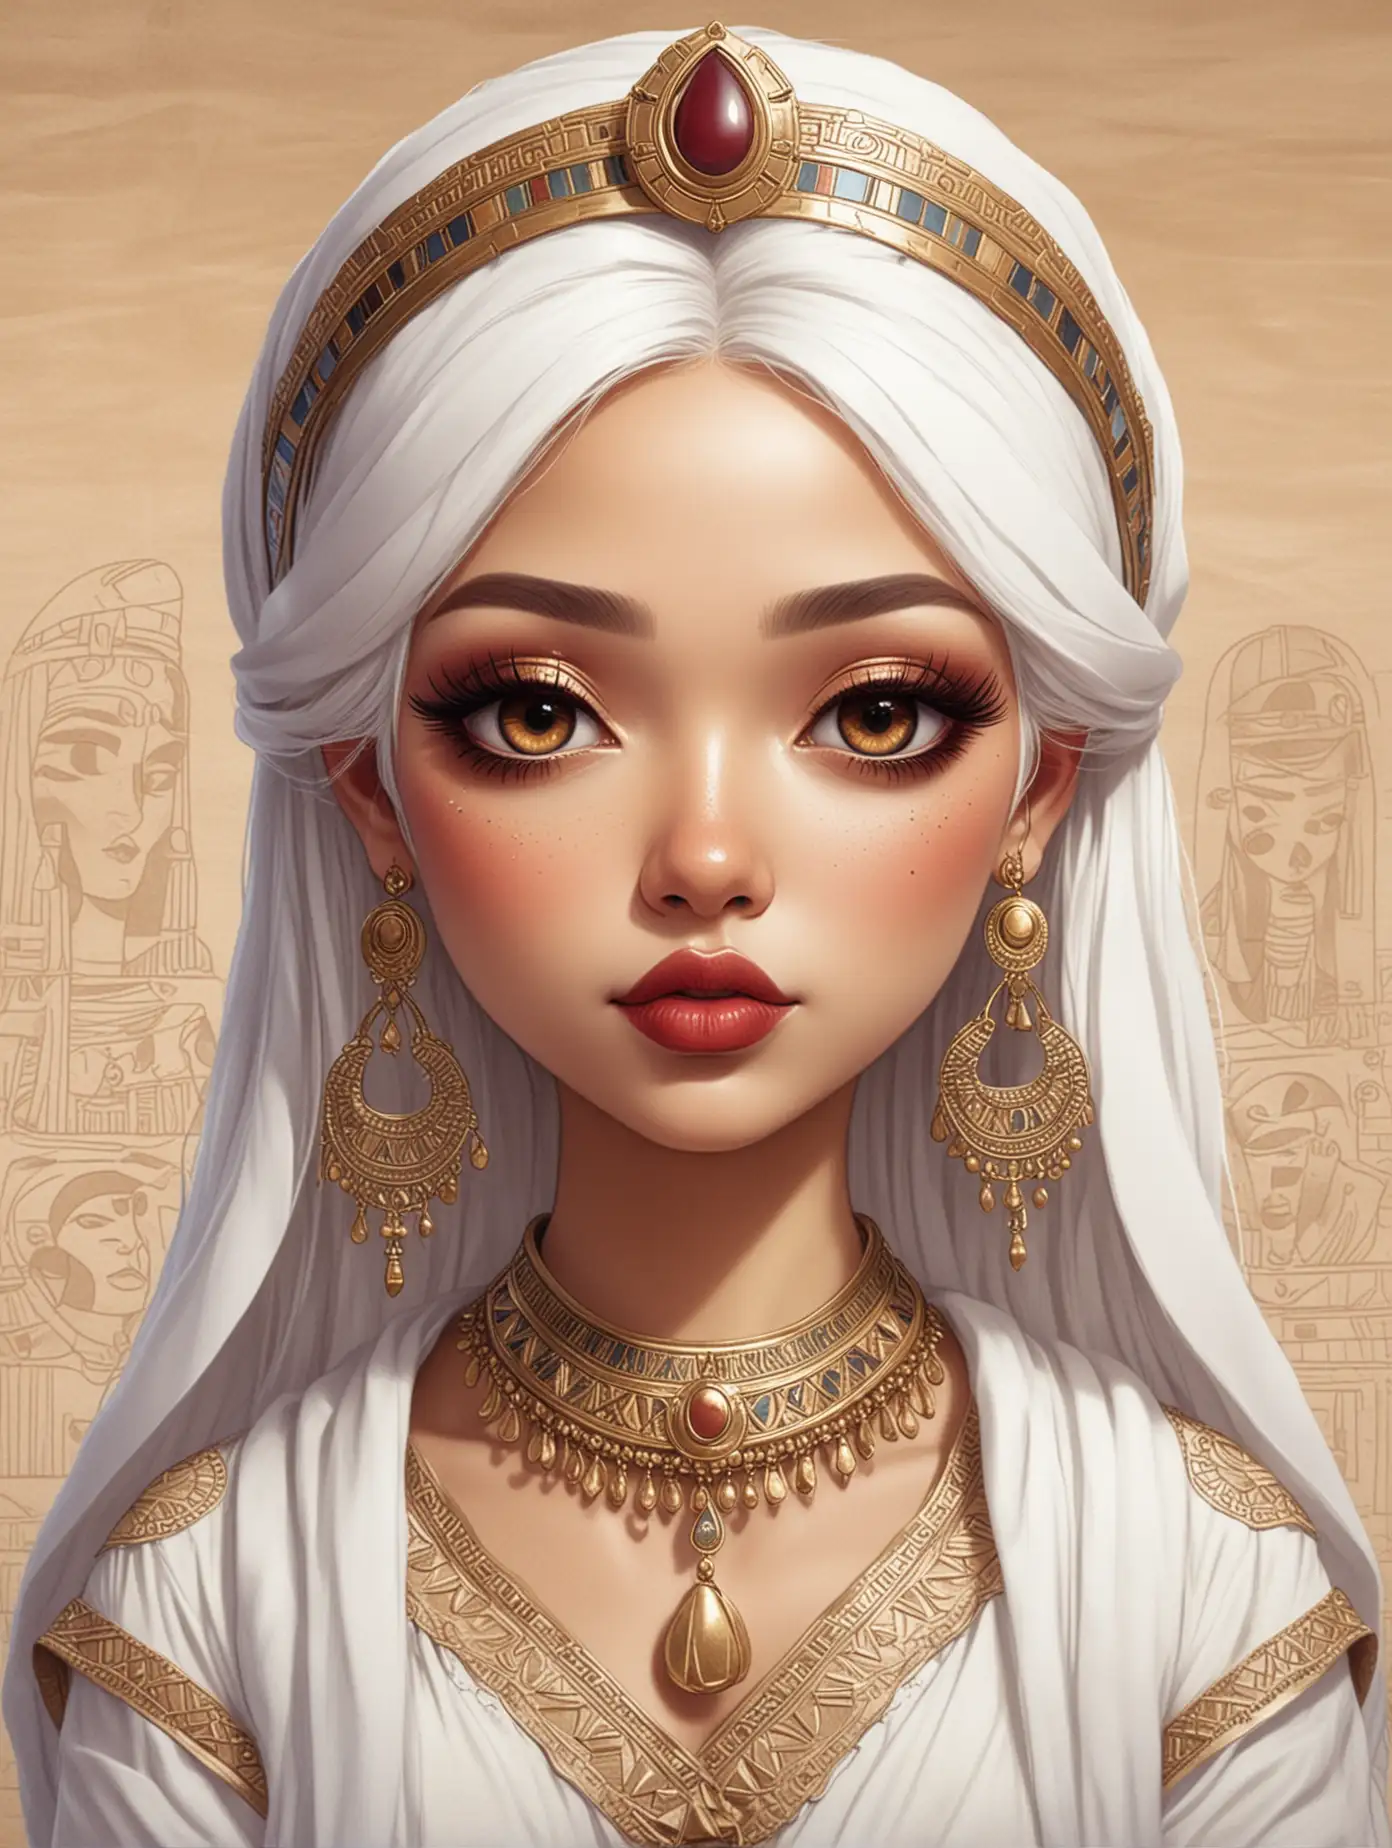 realistic pencil drawn sketch outline of a beautiful woman, chibi style, plump burgundy lips, big almond eyes, white hair. She is dressed in ancient Egyptian outfit, high heels, there's sights of Egypt behind her